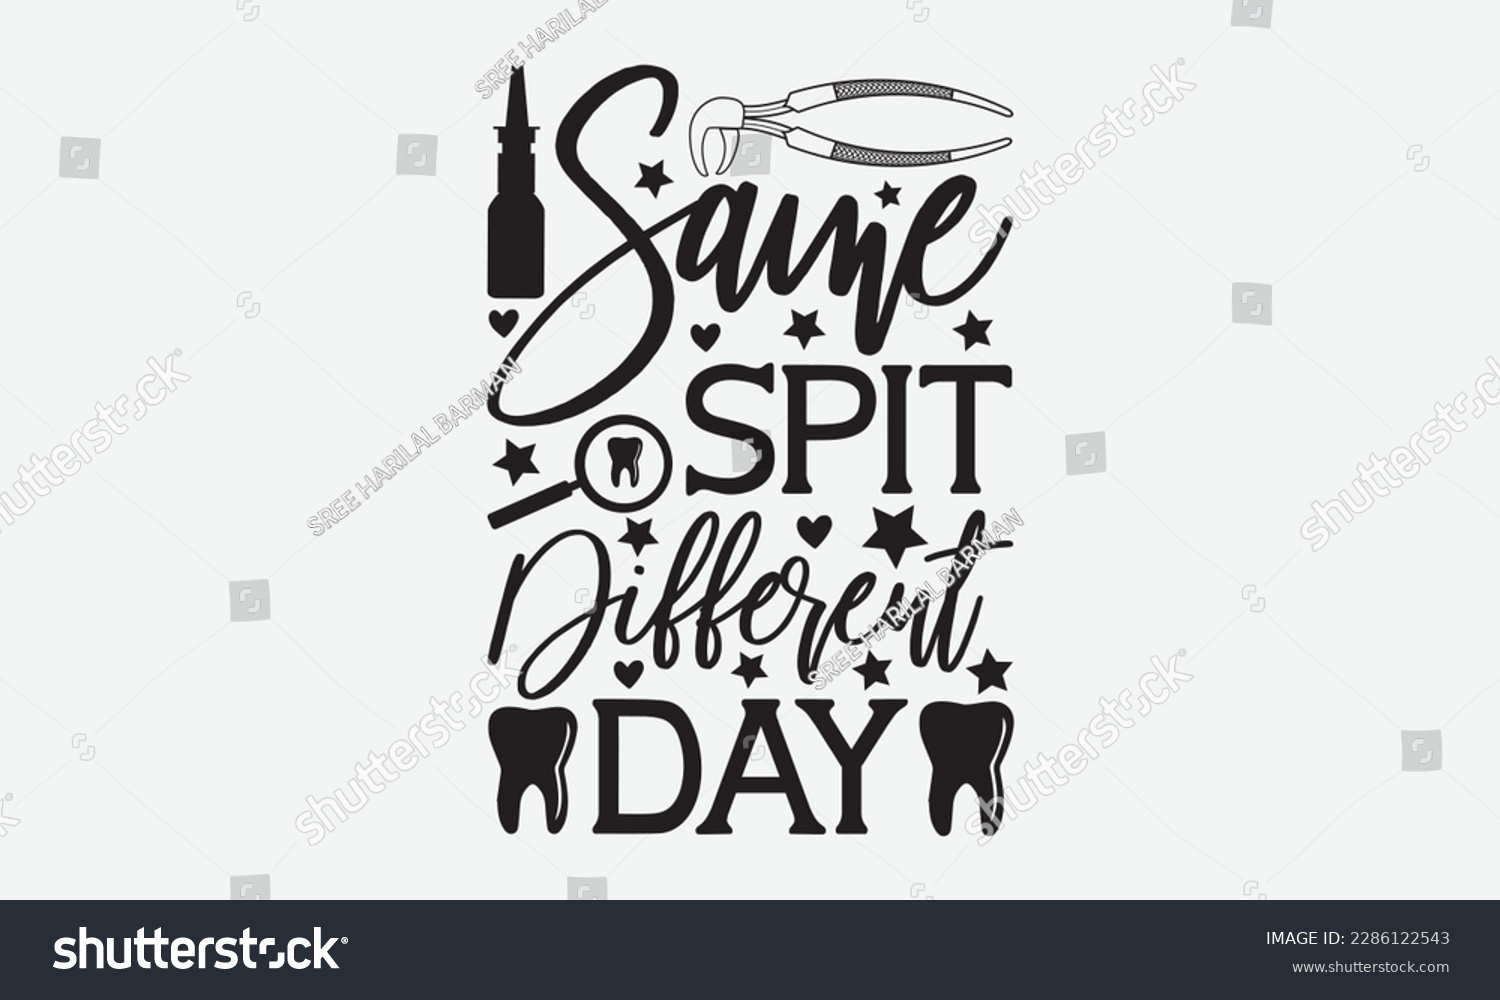 SVG of Same Spit Different Day - Dentist T-shirt Design, Conceptual handwritten phrase craft SVG hand-lettered, Handmade calligraphy vector illustration, template, greeting cards, mugs, brochures, posters, l svg